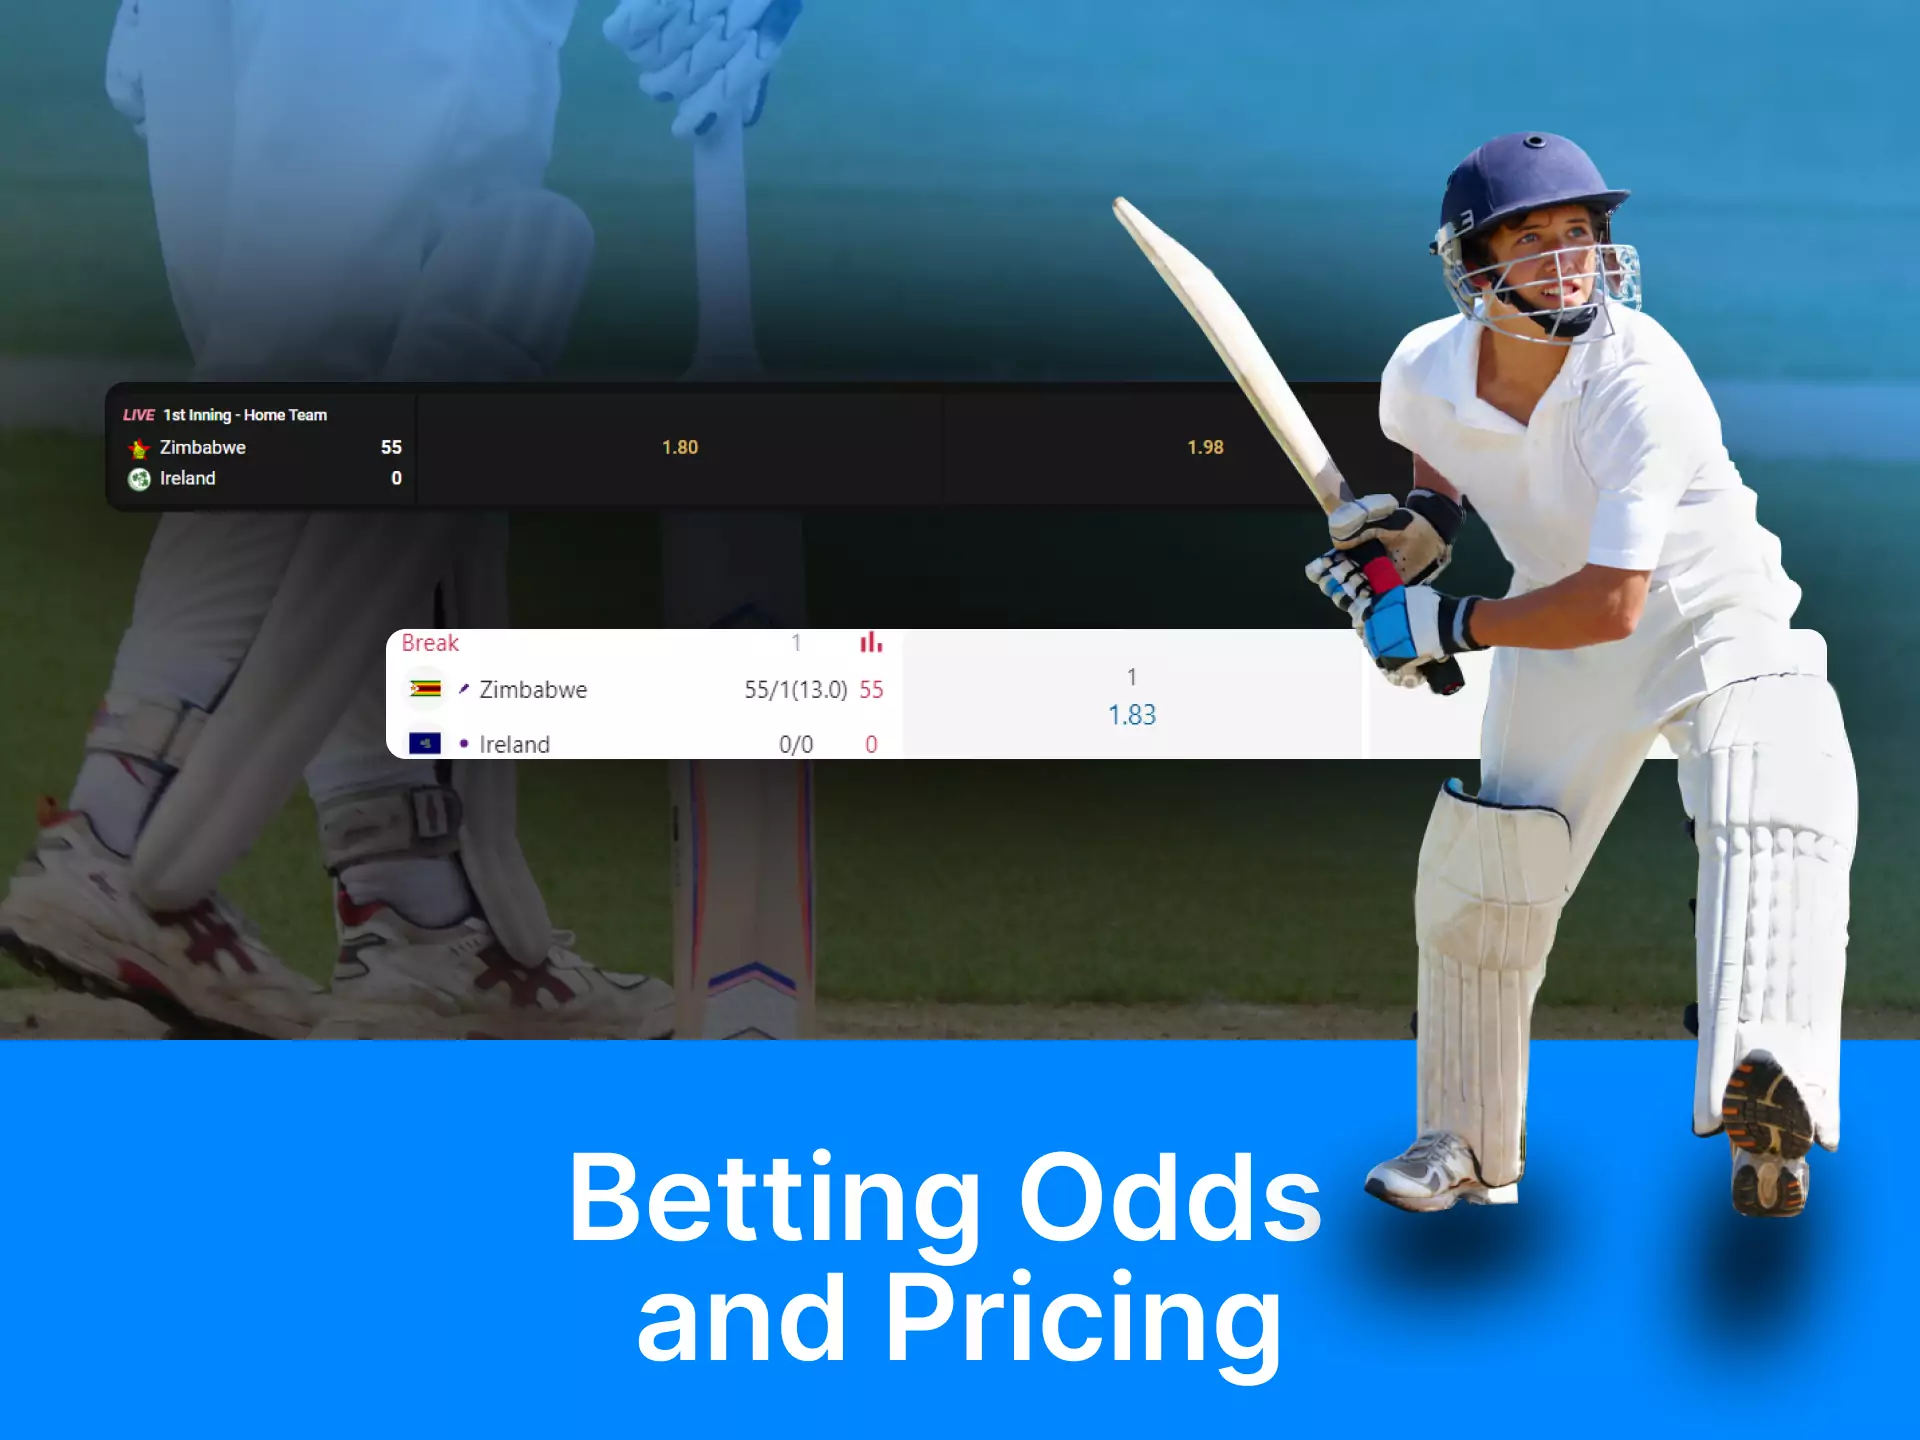 Read what betting odds mean and include.